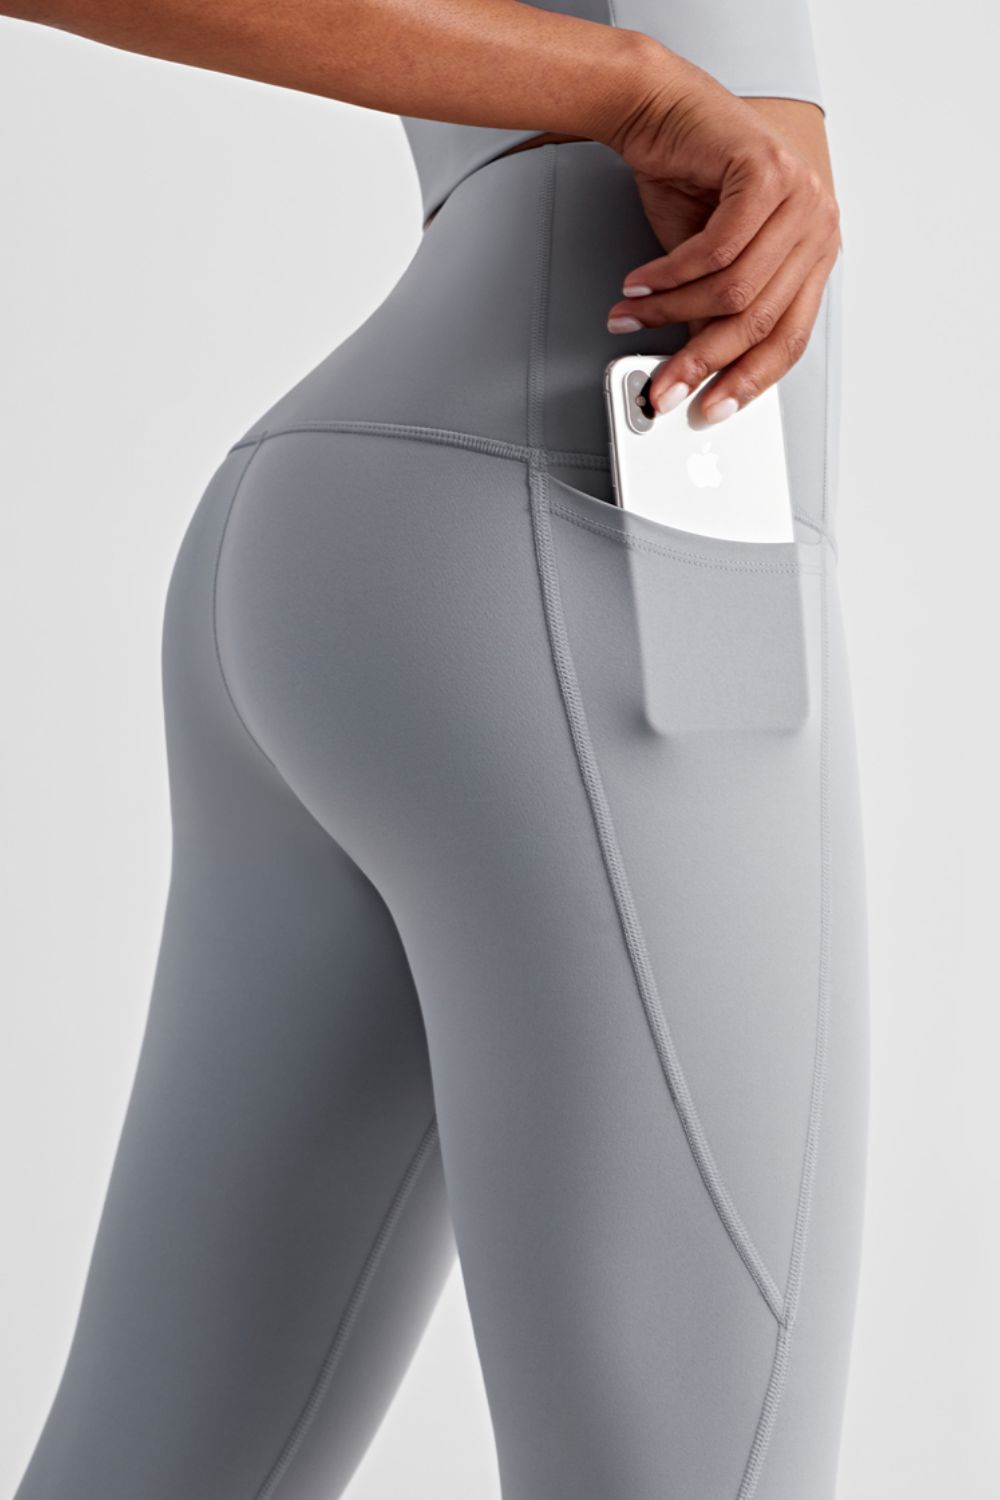 BACK TO SCHOOL   Wide Waistband Sports Leggings with Side Pockets